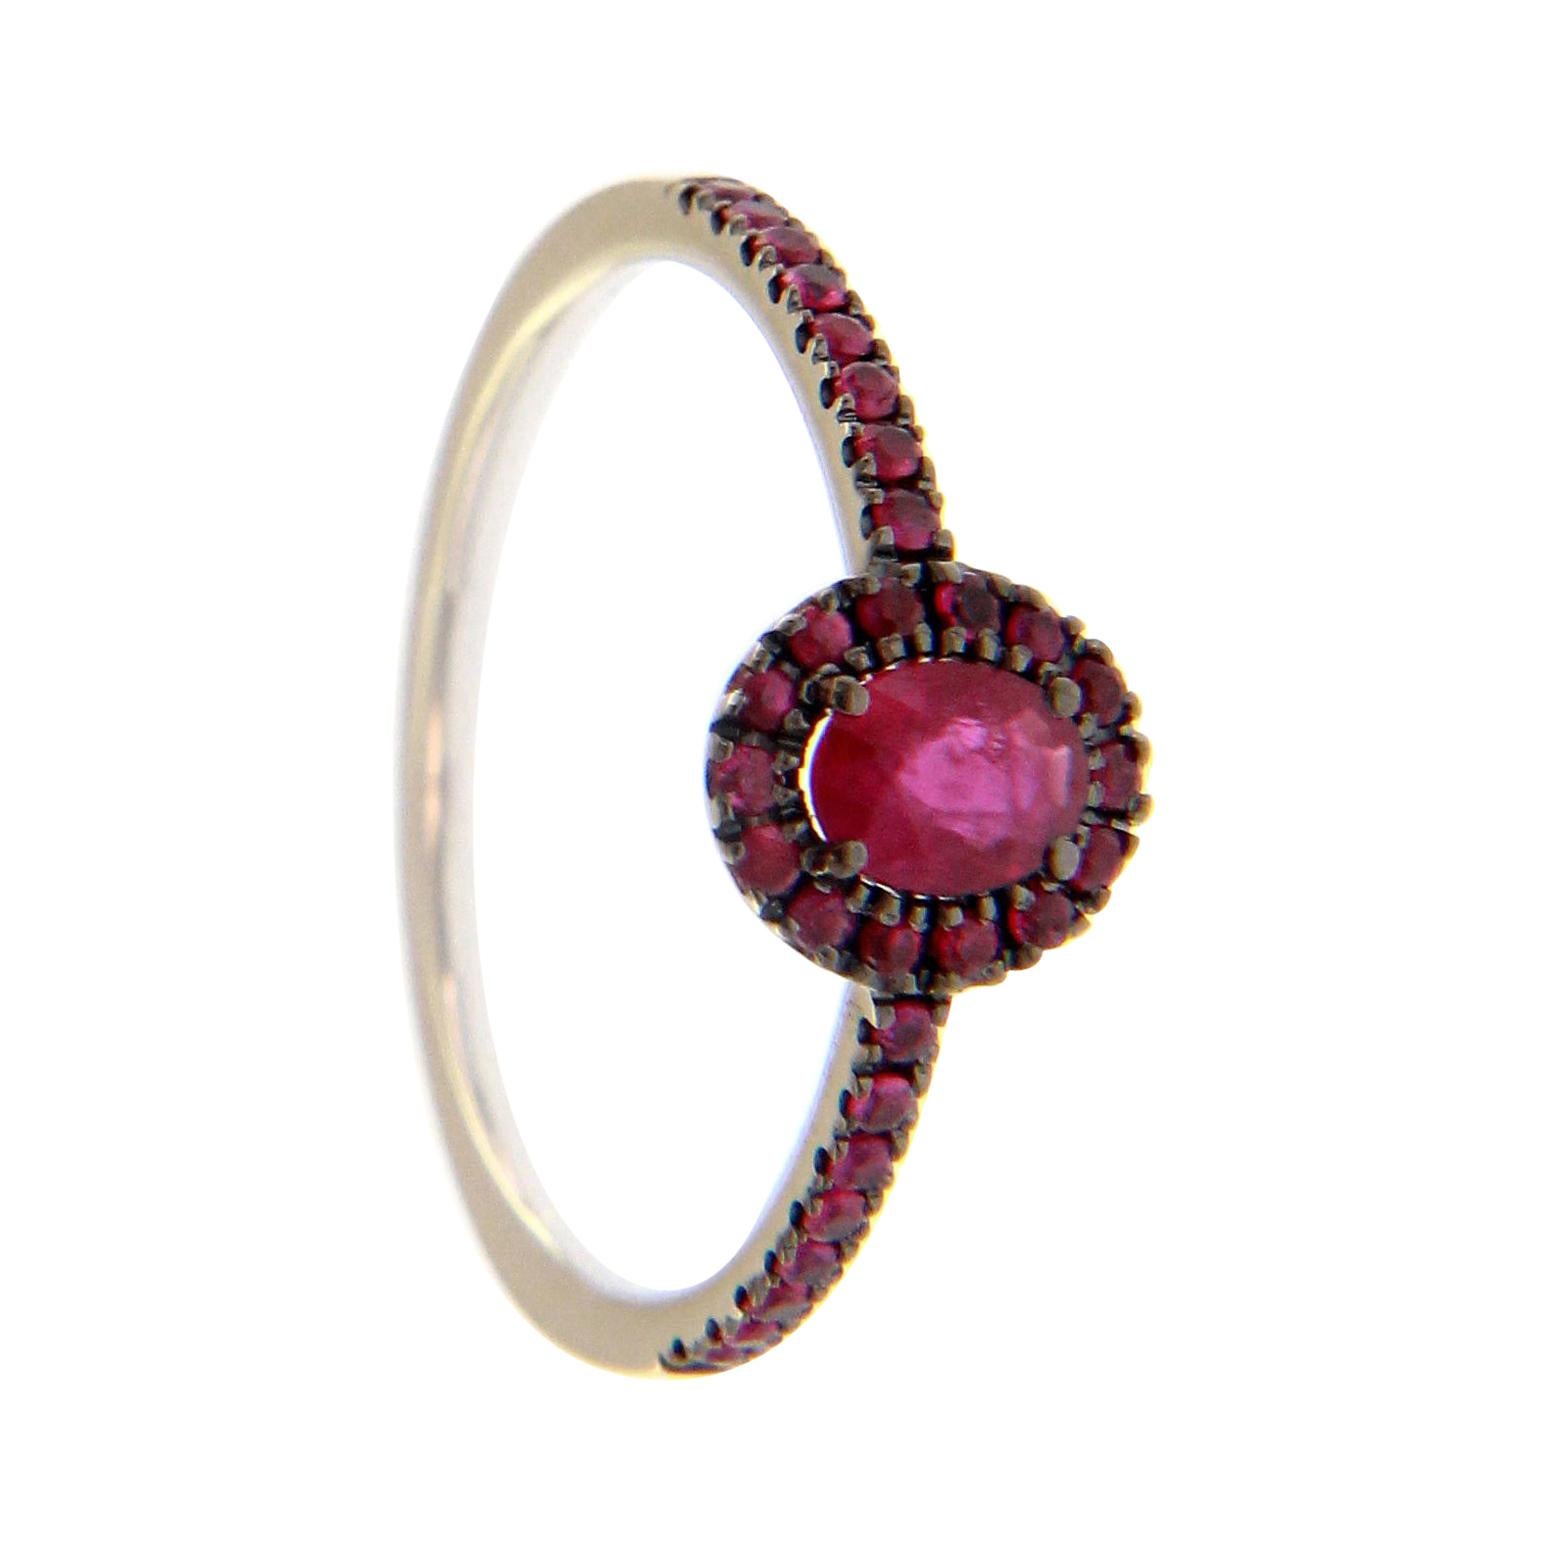 For Sale:  18k Black and White Golg Wedding Ring with Ruby